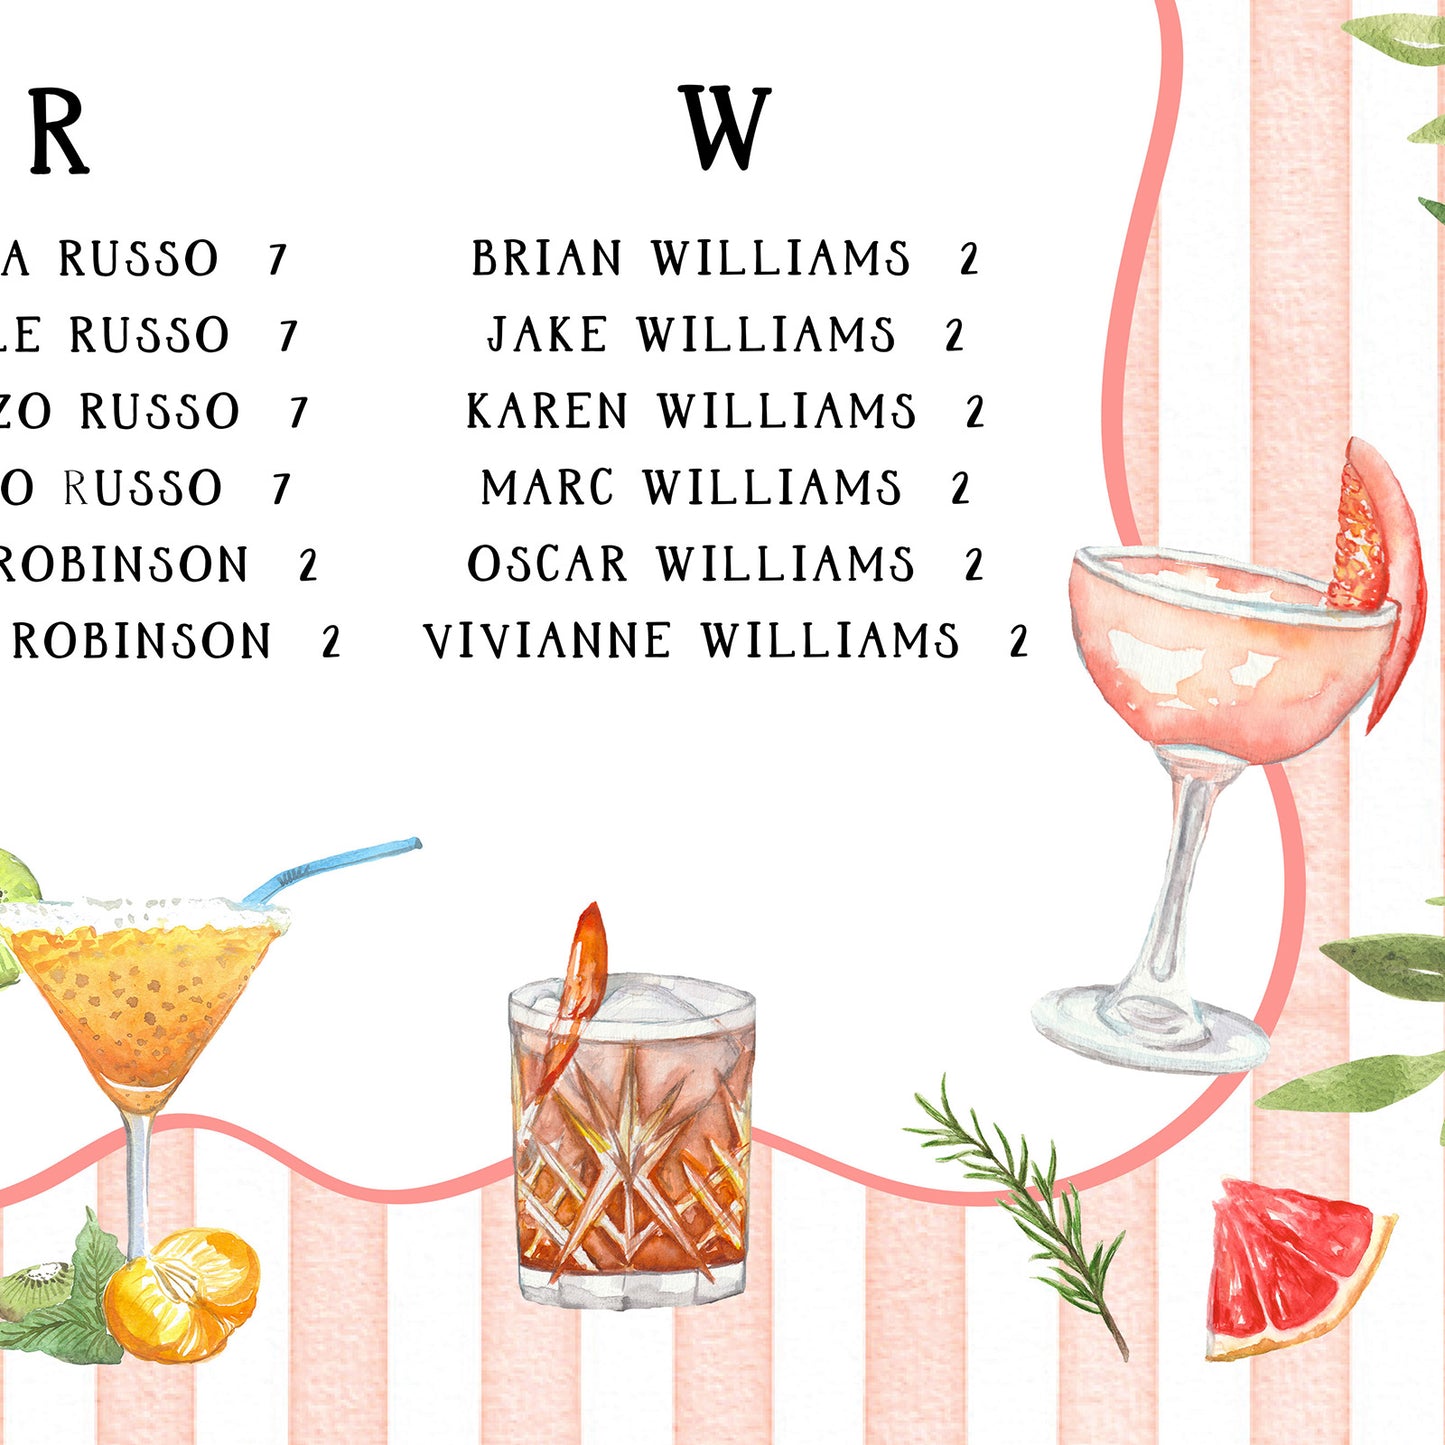 Cocktail themed wedding table plan with custom illustrations